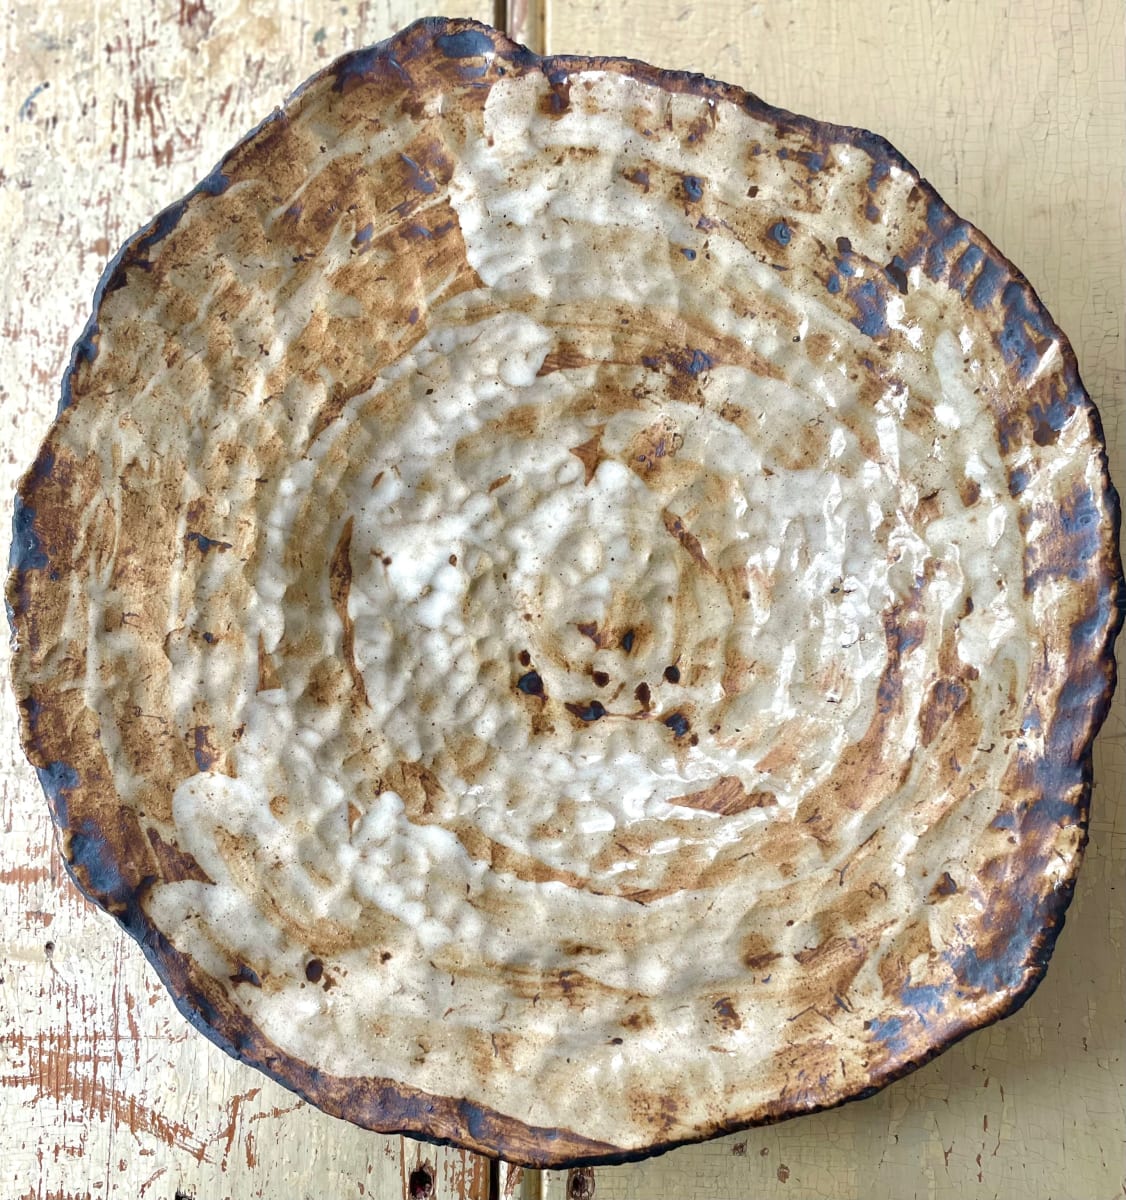 Rough Nacre Vessel #1 by Jennifer K Brown  Image: Unique platter, hand-built using traditional techniques, fired to 2500 degrees. Food and dishwasher safe.